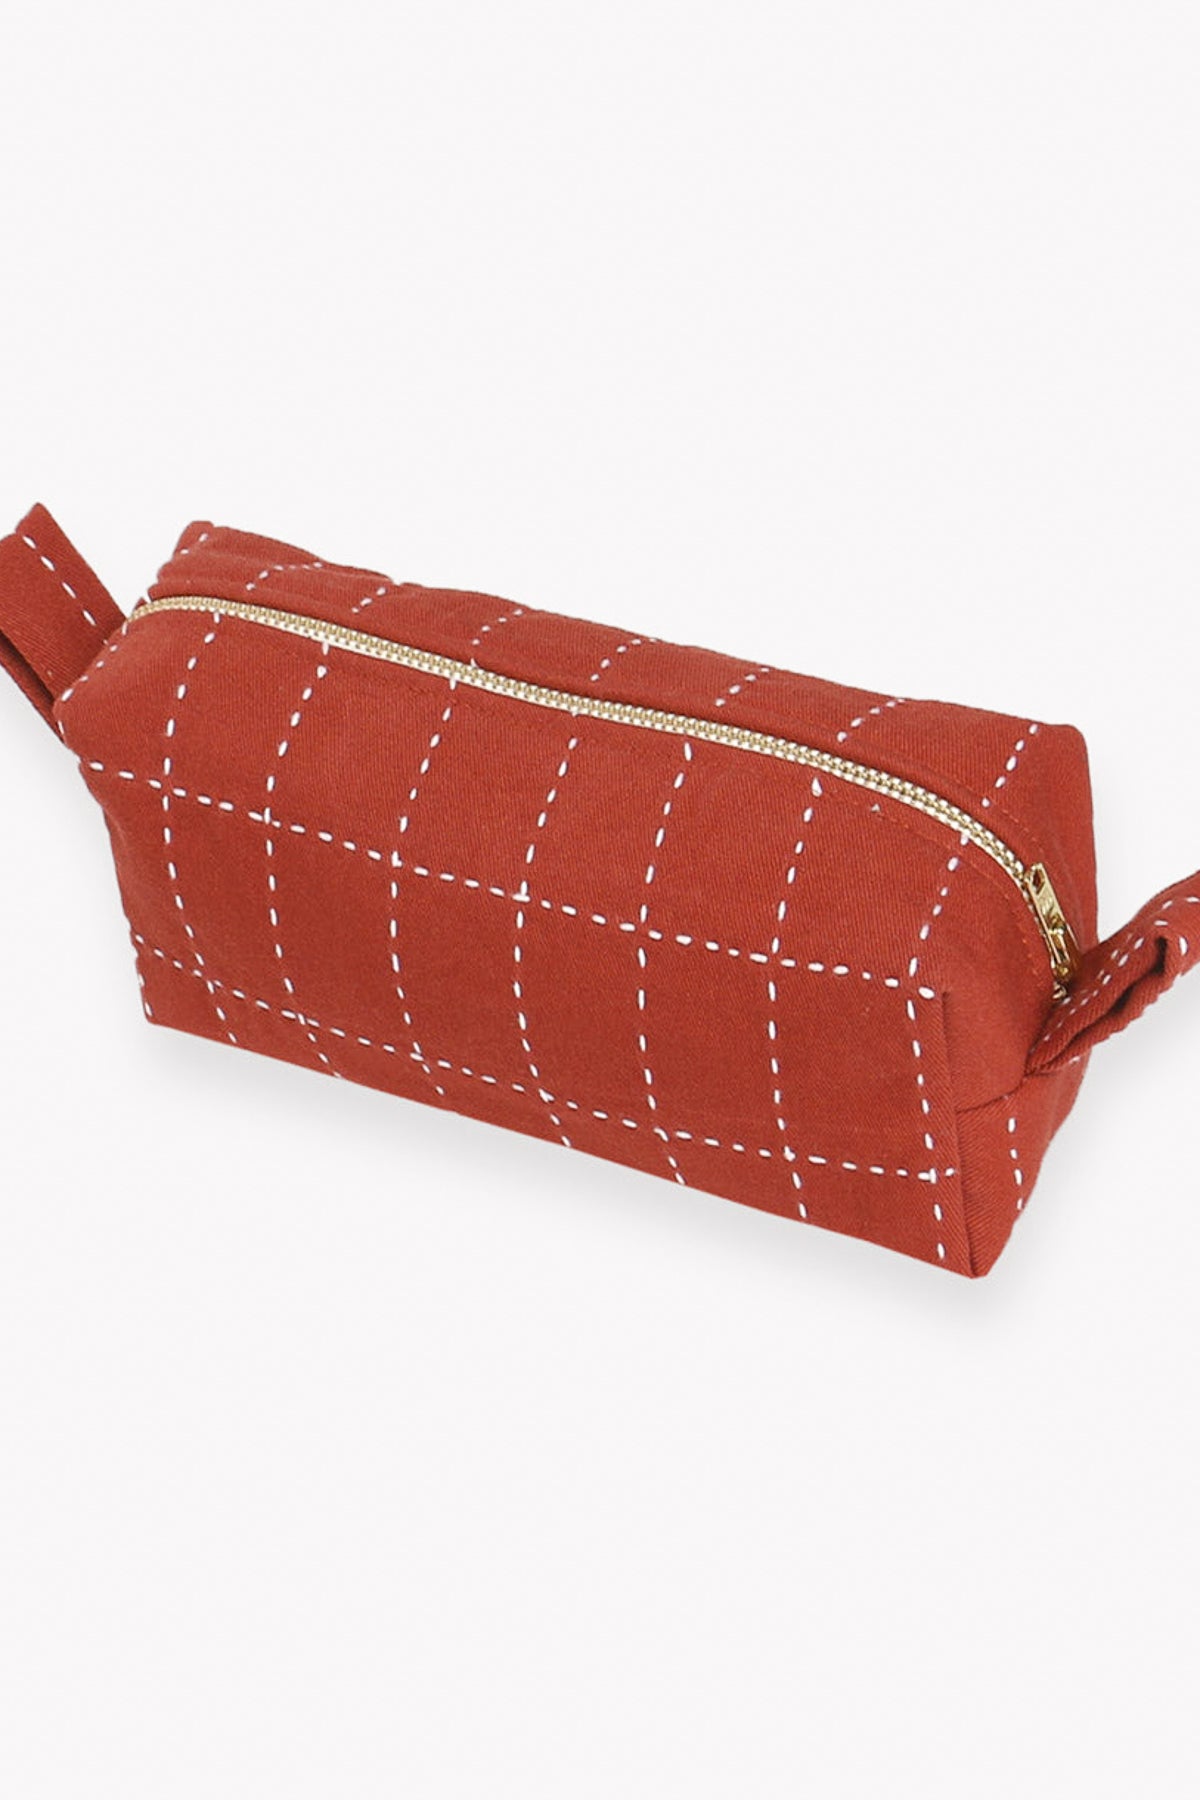 Anchal Project Slim Toiletry Bag